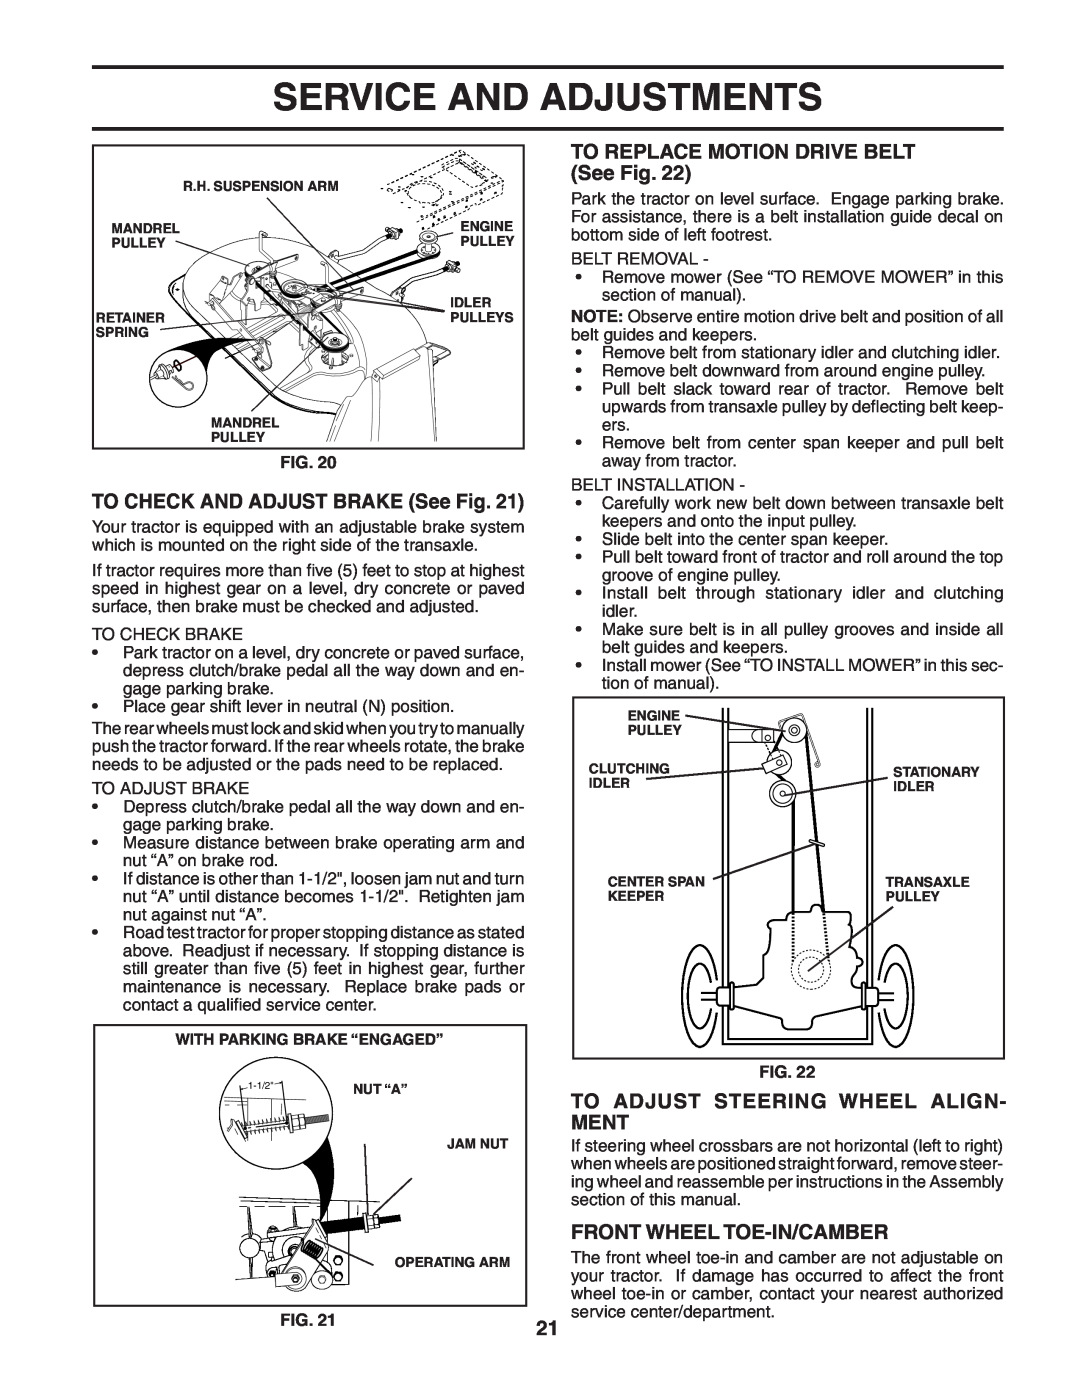 Poulan PO1538C manual TO CHECK AND ADJUST BRAKE See Fig, TO REPLACE MOTION DRIVE BELT See Fig, Front Wheel Toe-In/Camber 